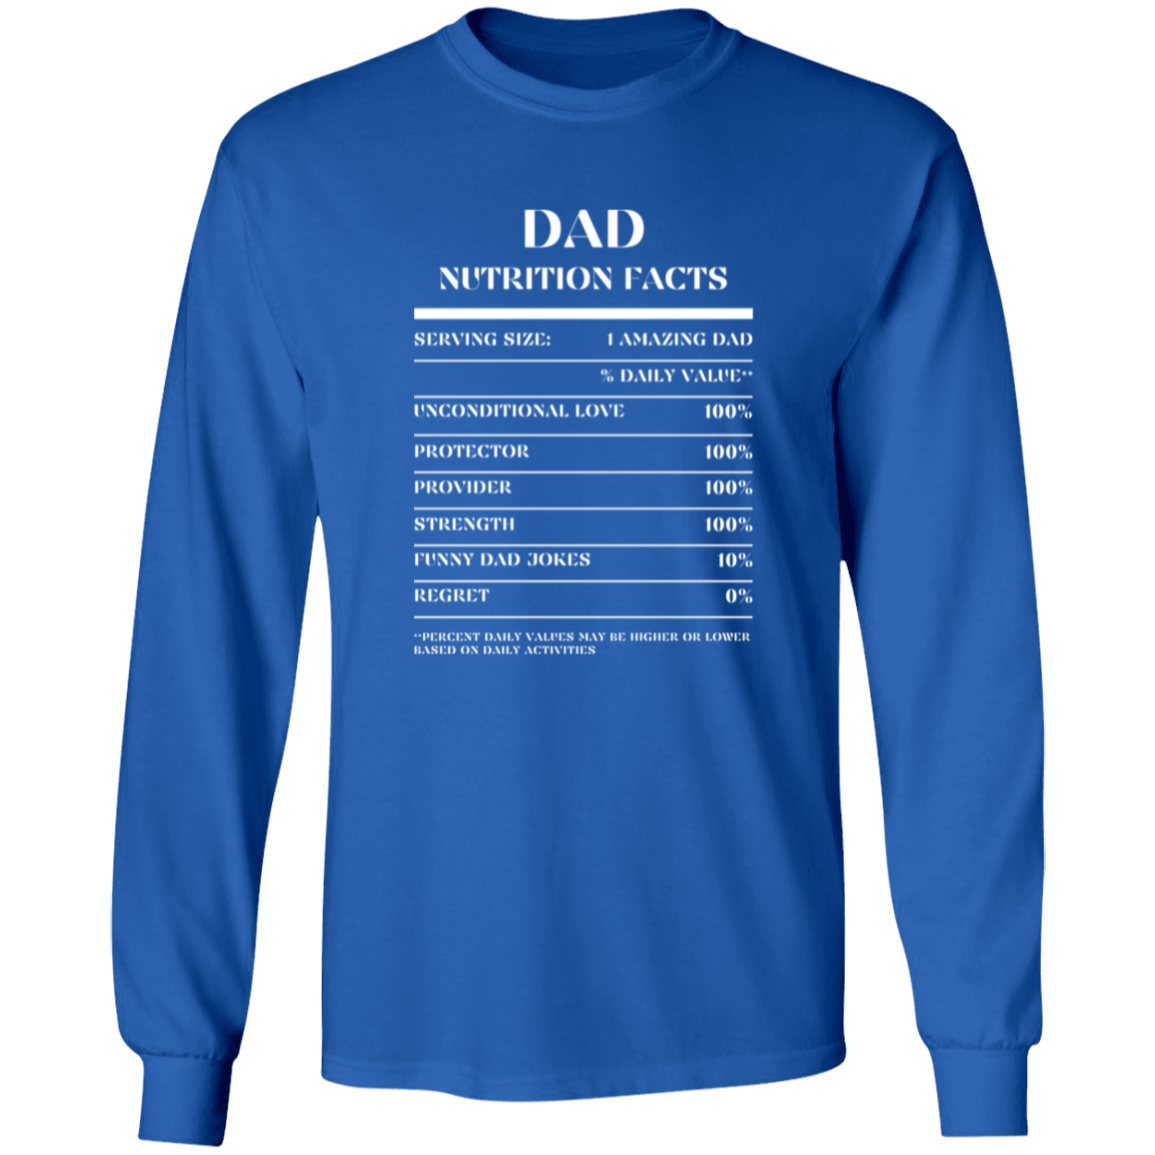 Nutrition Facts T-Shirt LS - Dad - White